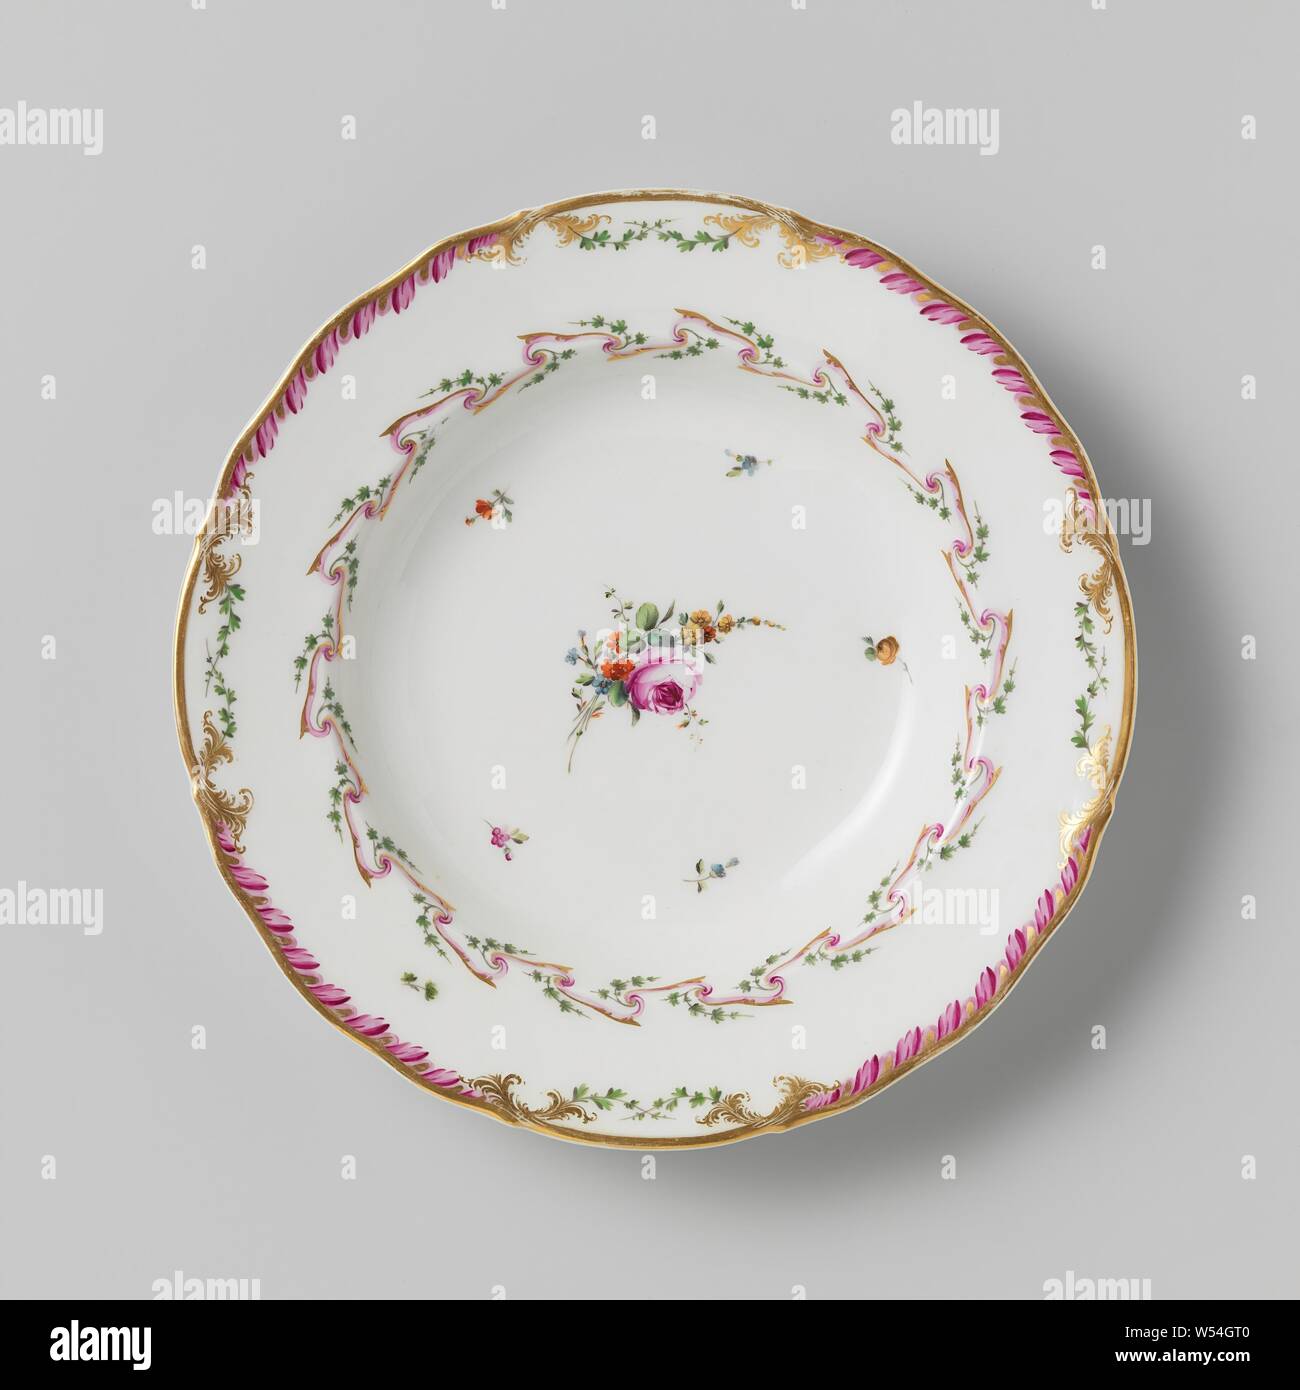 Plate, deep model, belonging to a service with a slung ribbon motif with leaves, flower bouquets and scattered flower branches, belonging to a porcelain service with slung ribbon motif in purple and gold with green leaves, flower bouquets and scattered flower branches. Borders slightly corrugated with decoration in gold with a purple leaf motif between which green crossed leaf motif. Marked: Mf. THE DIHL ET GUERHARD à PARIS. Series of eleven pieces., Dihl et Guerhard, Amsterdam, 1780 - in or before 1820, porcelain (material), h 4.2 cm × d 24.5 cm Stock Photo